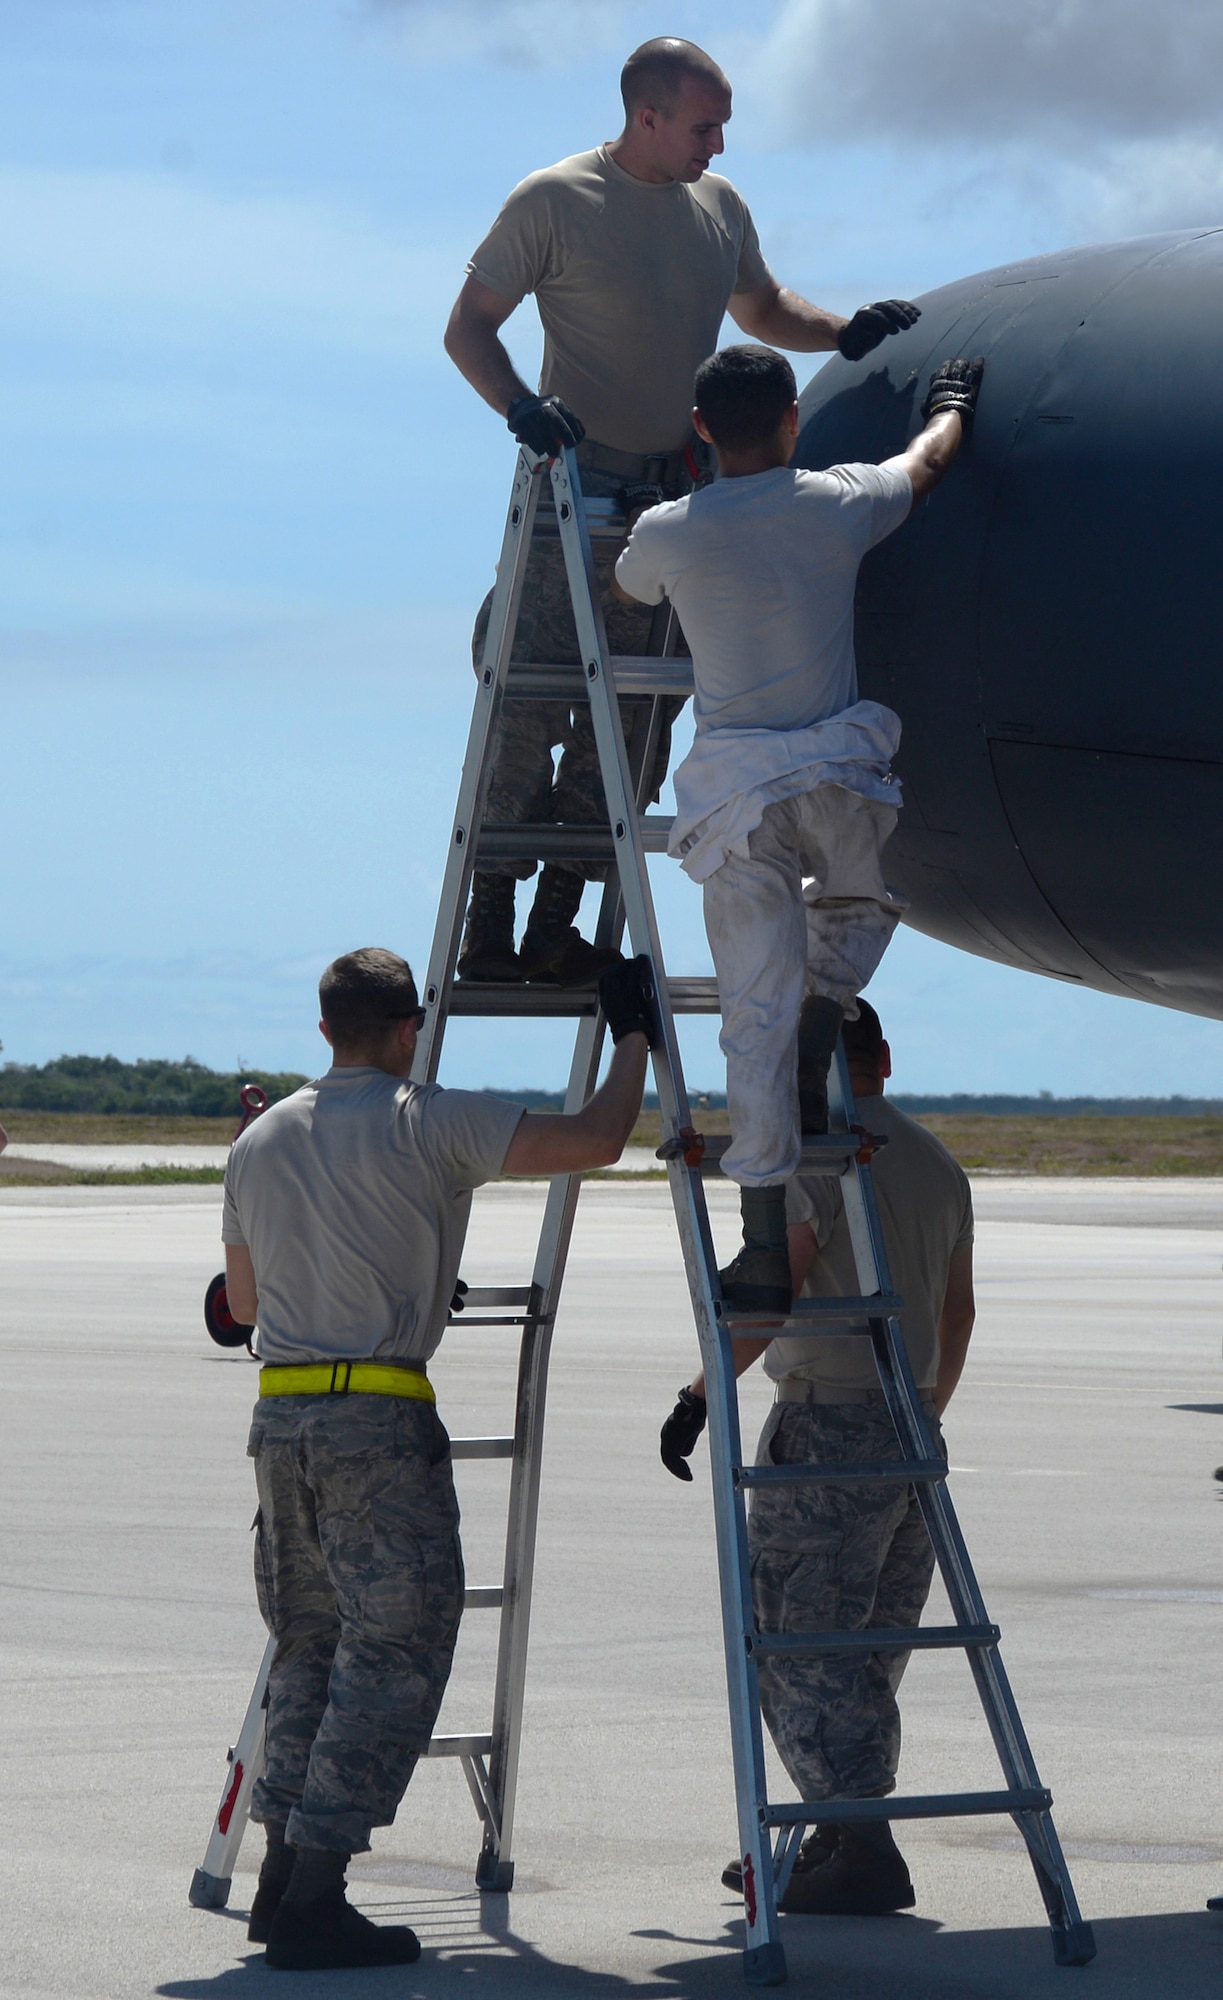 Members from the 36th Expeditionary Aircraft Maintenance Squadron conduct a post-flight inspection on a B-52 Stratofortress after its arrival June 2, 2016, at Andersen Air Force Base, Guam.  The aircraft is deployed in support of U.S. Pacific Command’s Continuous Bomber Presence operations. The U.S. military has maintained a deployed strategic bomber presence in the Pacific since March 2004, which has contributed significantly to regional security and stability. (U.S. Air Force photo by Airman 1st Class Alexa Ann Henderson/Released)